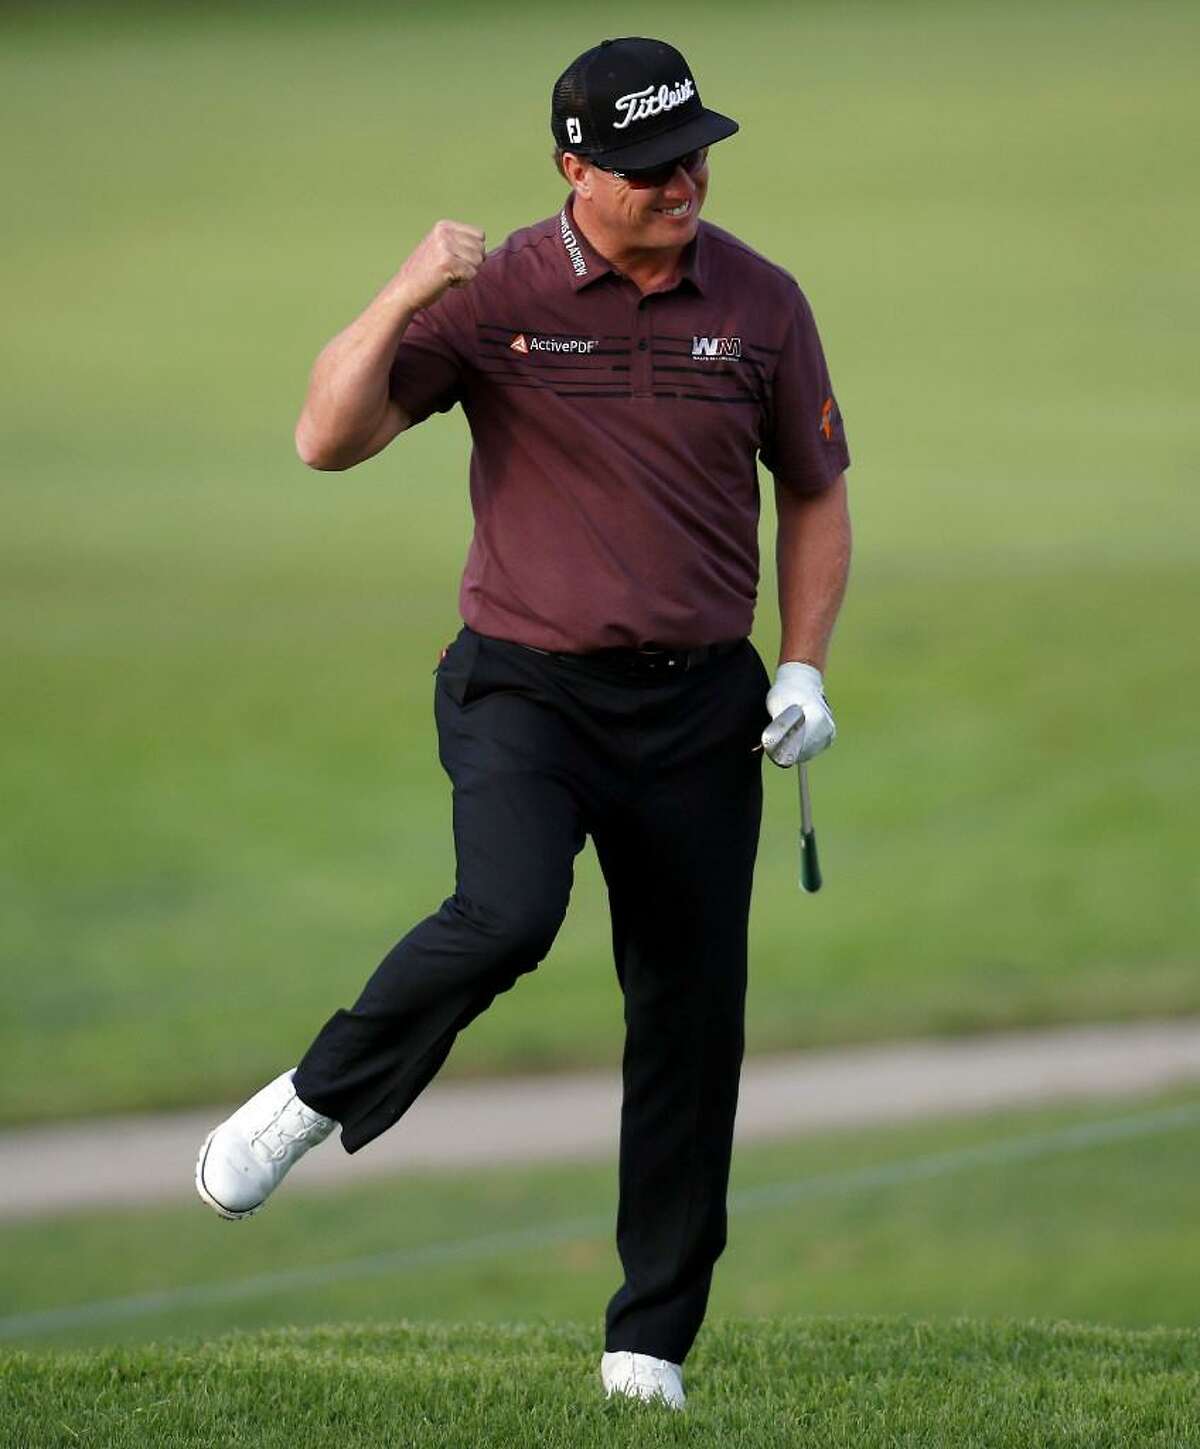 Charley Hoffman reacts after chipping in to save par on the 15th hole during the final round of the Genesis Open golf tournament at Riviera Country Club Sunday, Feb. 19, 2017, in the Pacific Palisades area of Los Angeles.